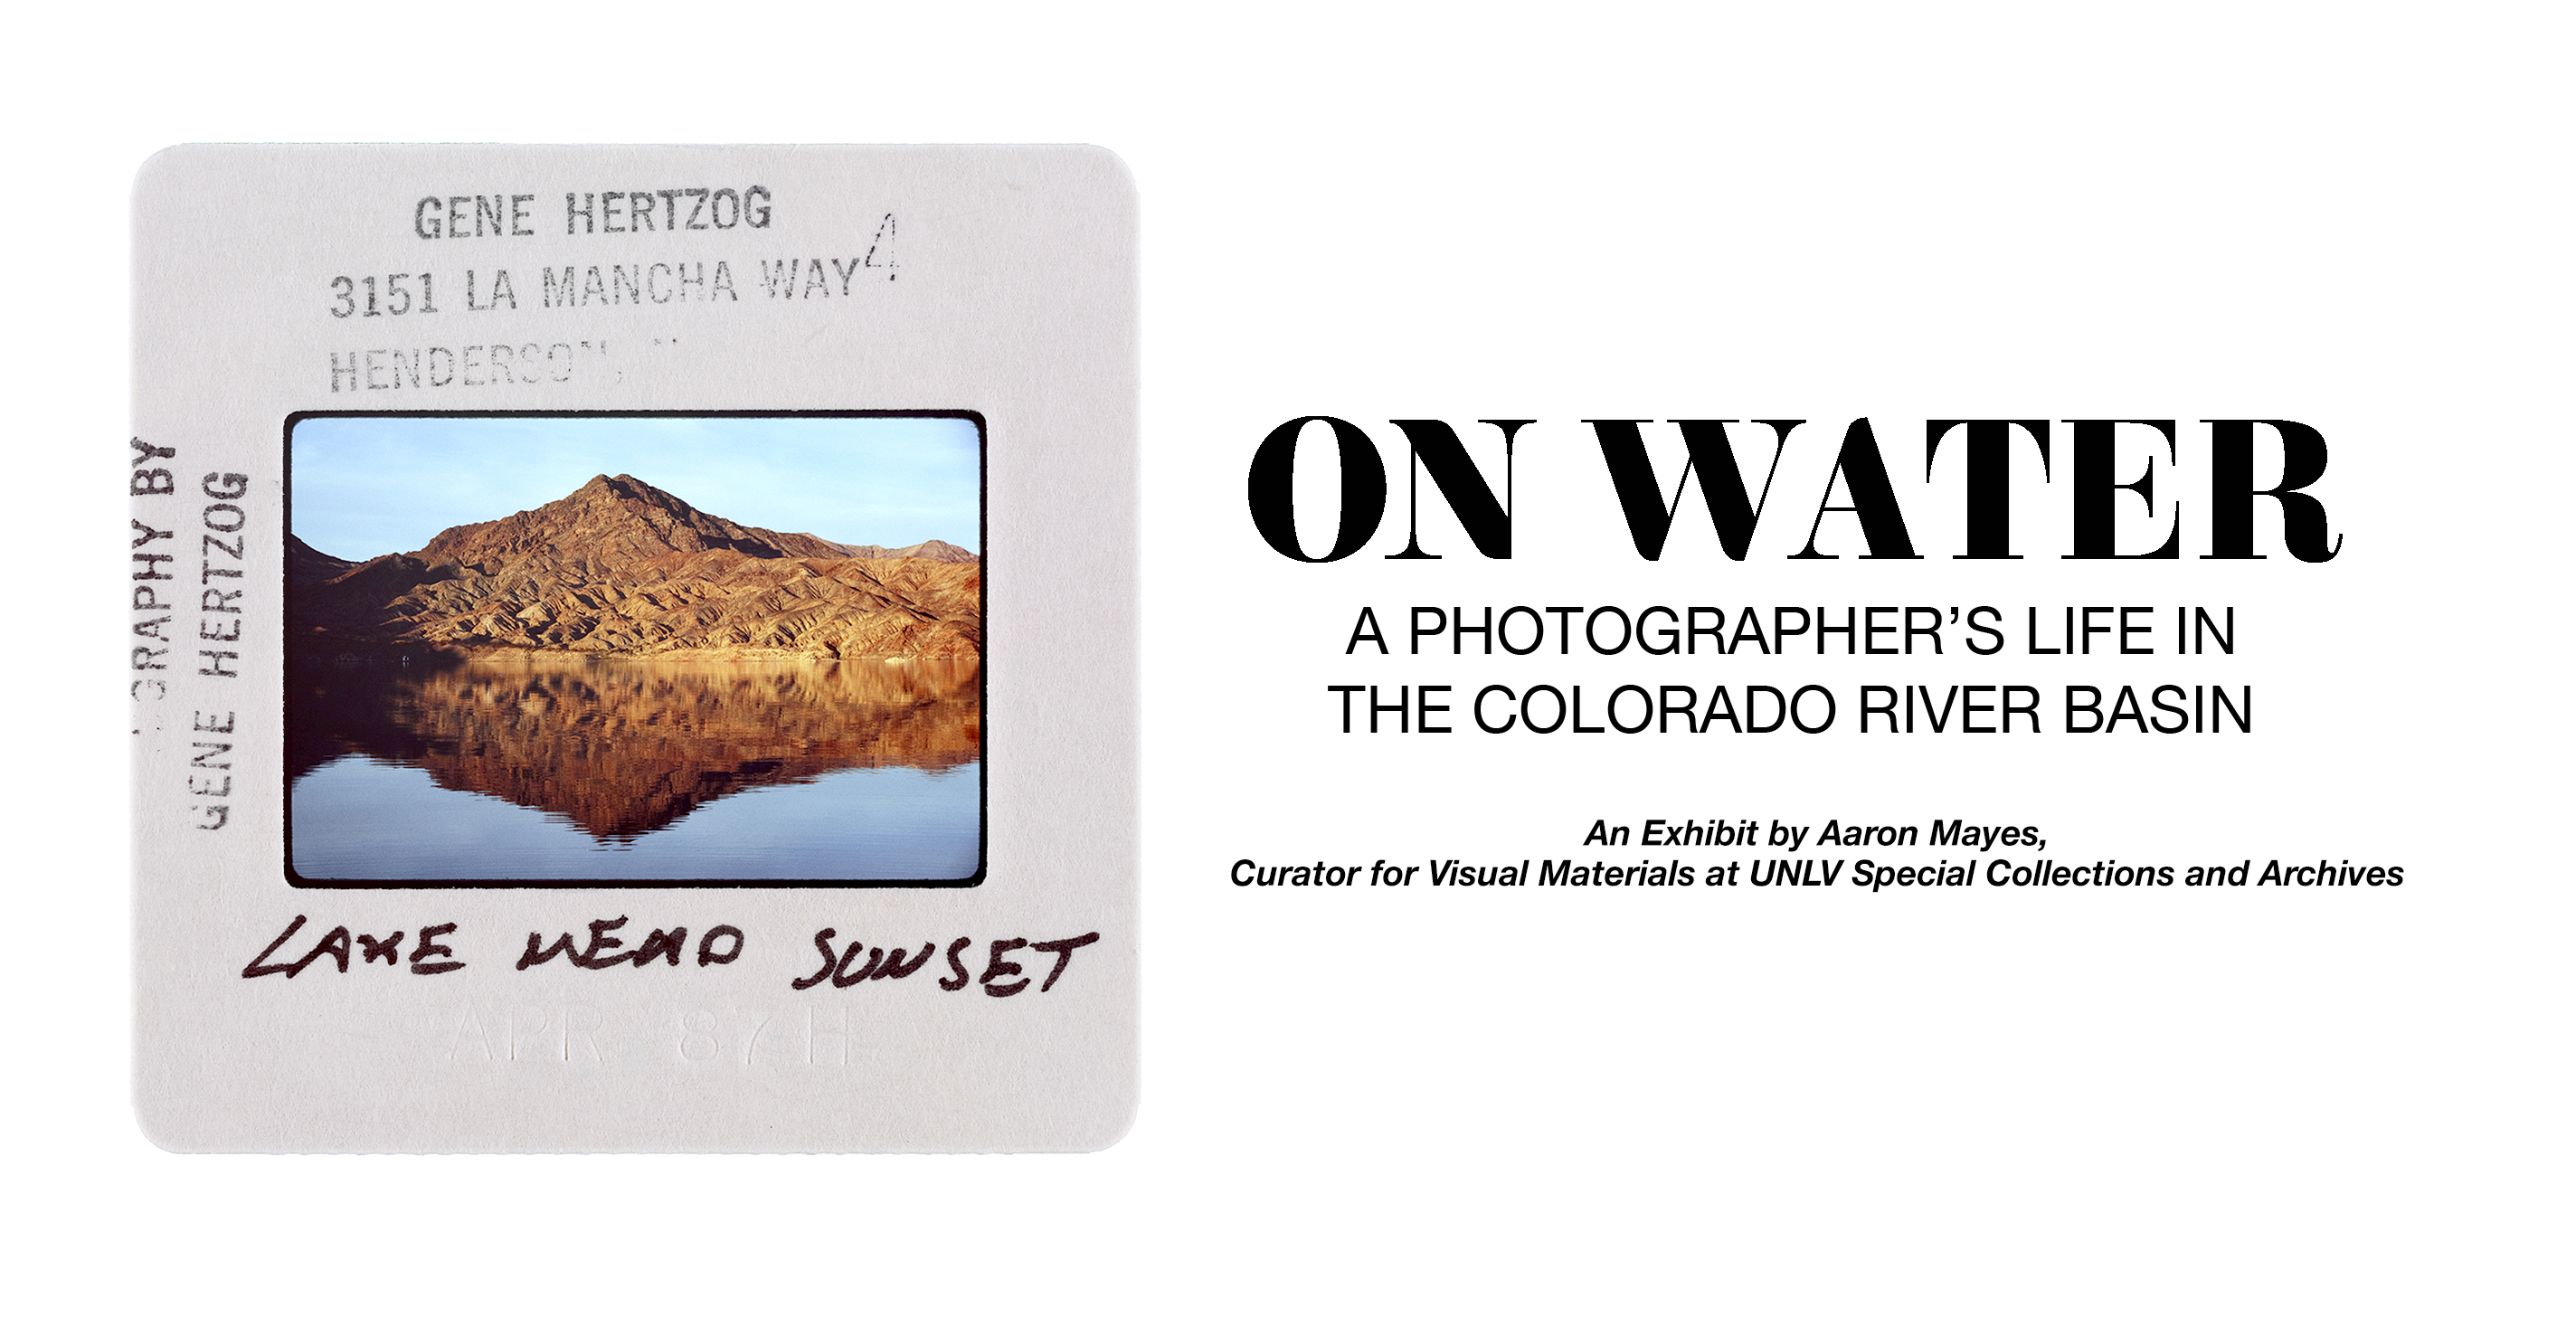 On Water: A Photographer’s Life in the Colorado River Basin